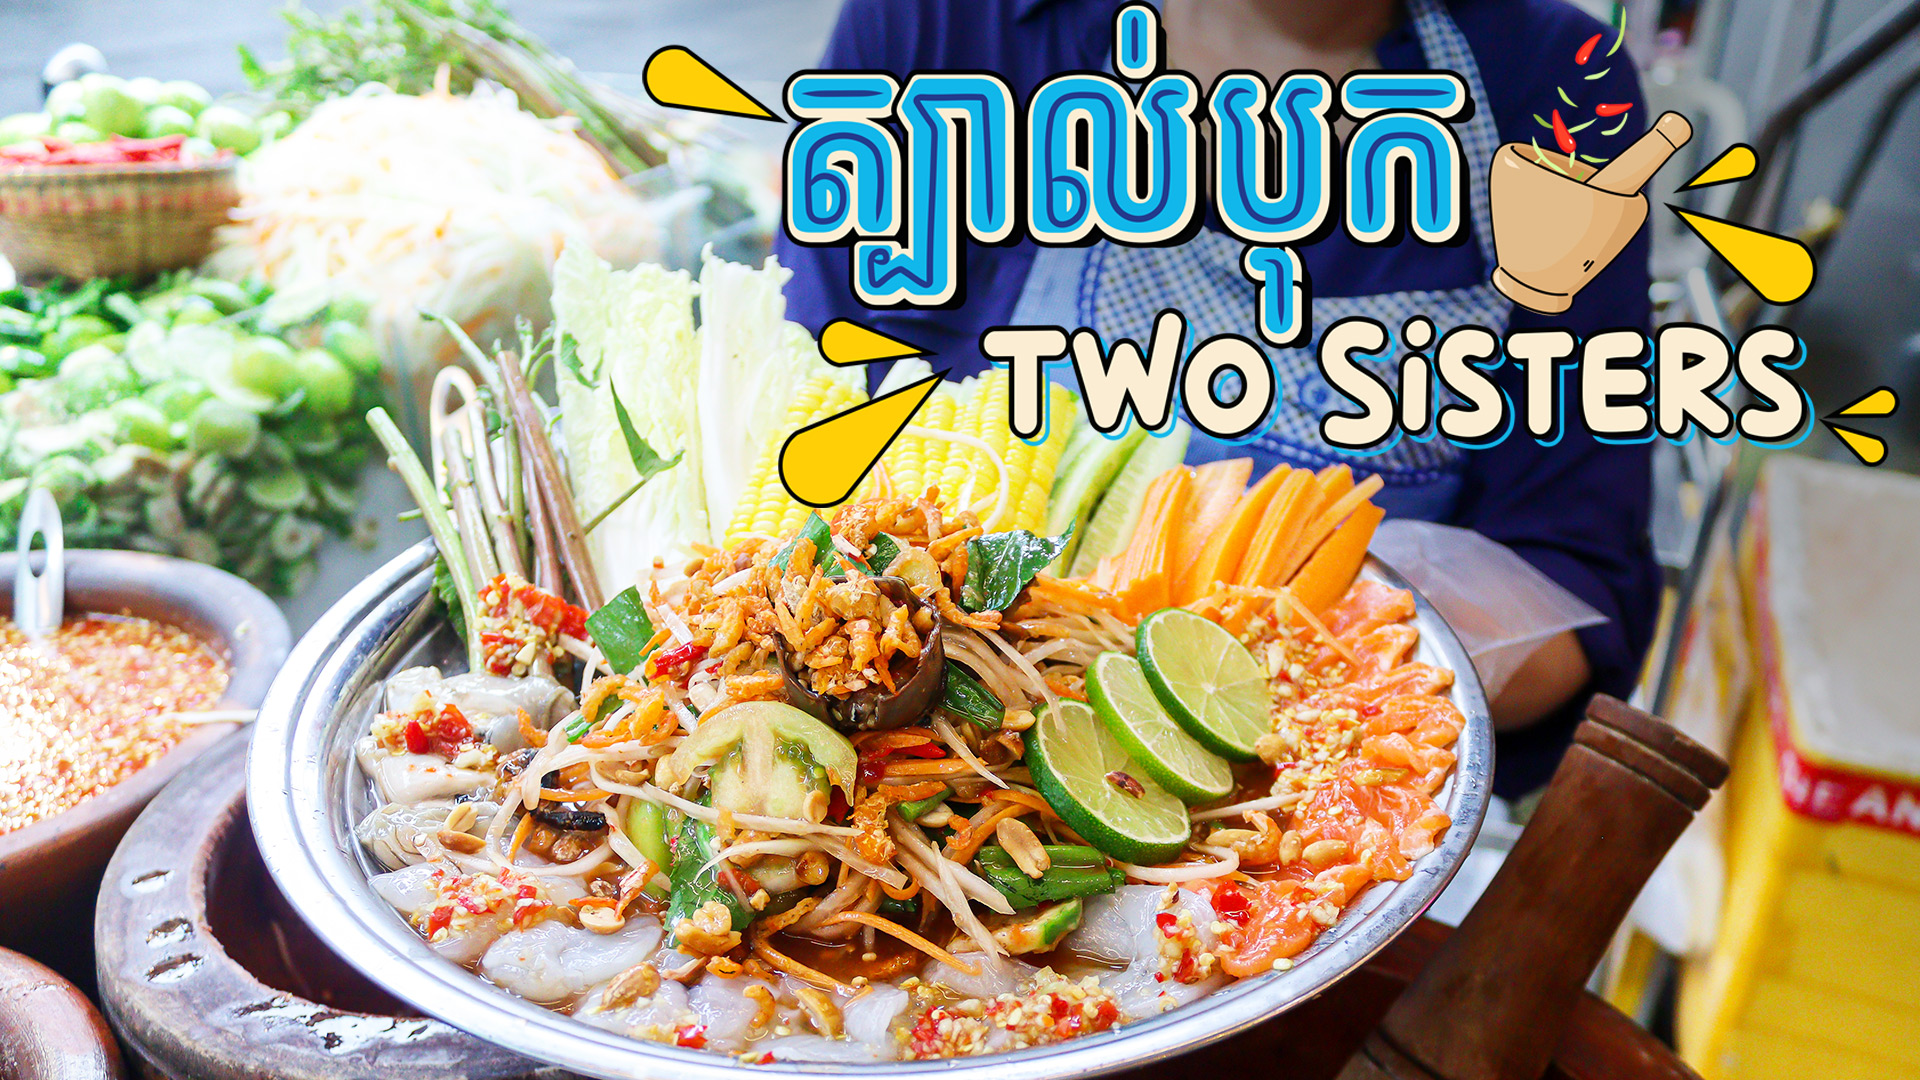 Tbal Bok 2 Sisters - An all-typed spicy salad place that you can find in Phnom Penh